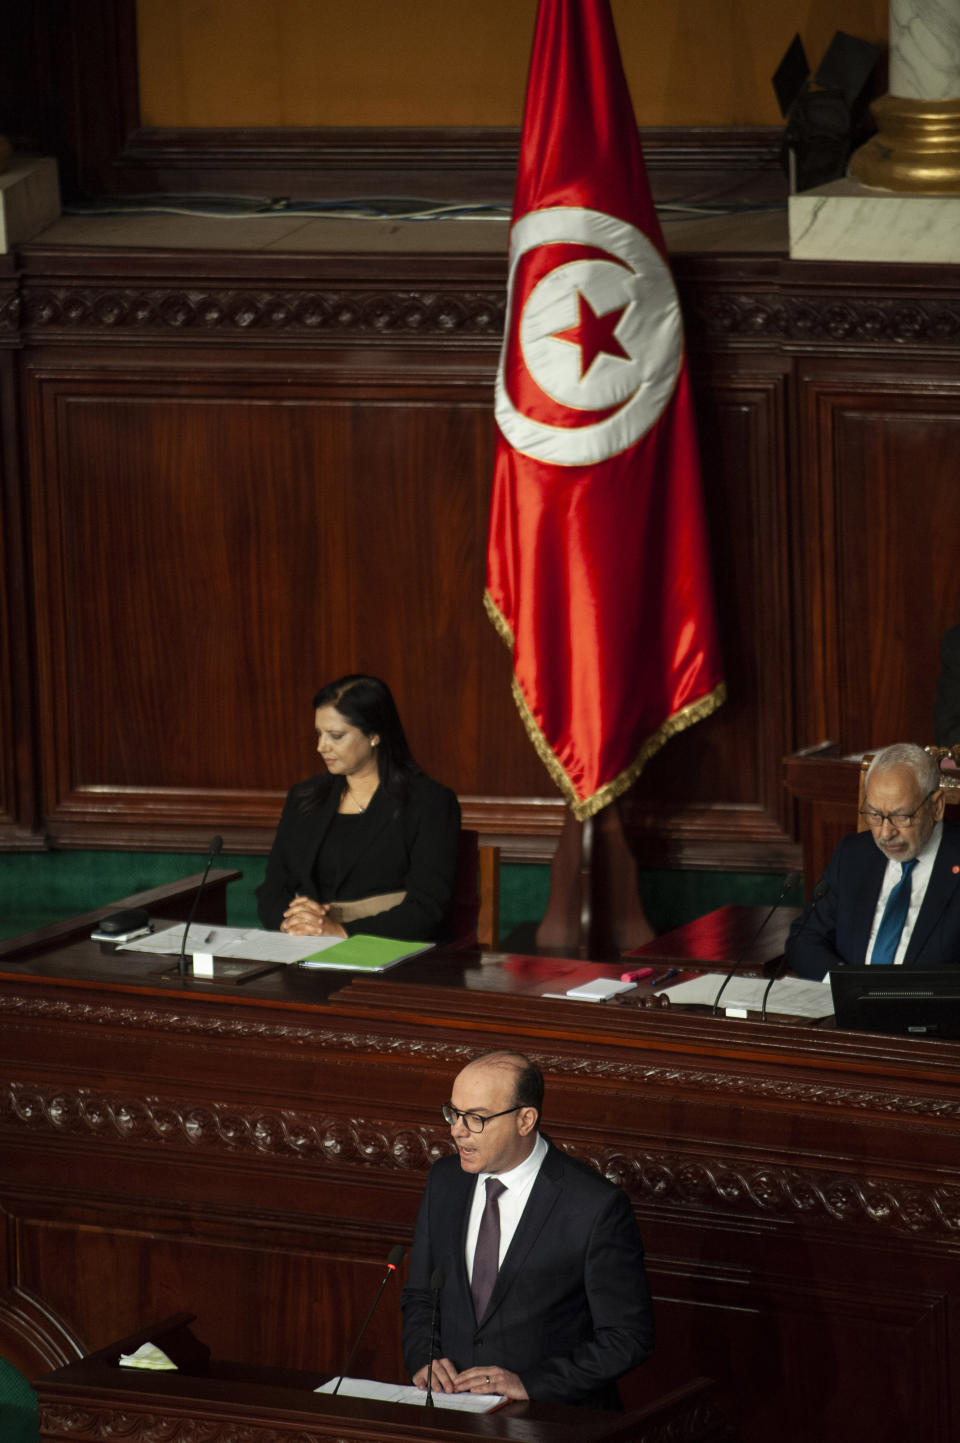 Tunisian designated Prime Minister Elyes Fakhfakh, below center, delivers his speech at the parliament, Wednesday, Feb. 26, 2020. Tunisia's parliament is expected to hold a confidence vote Wednesday on designated prime minister Elyes Fakhfakh's government. (AP Photo/Hassene Dridi)